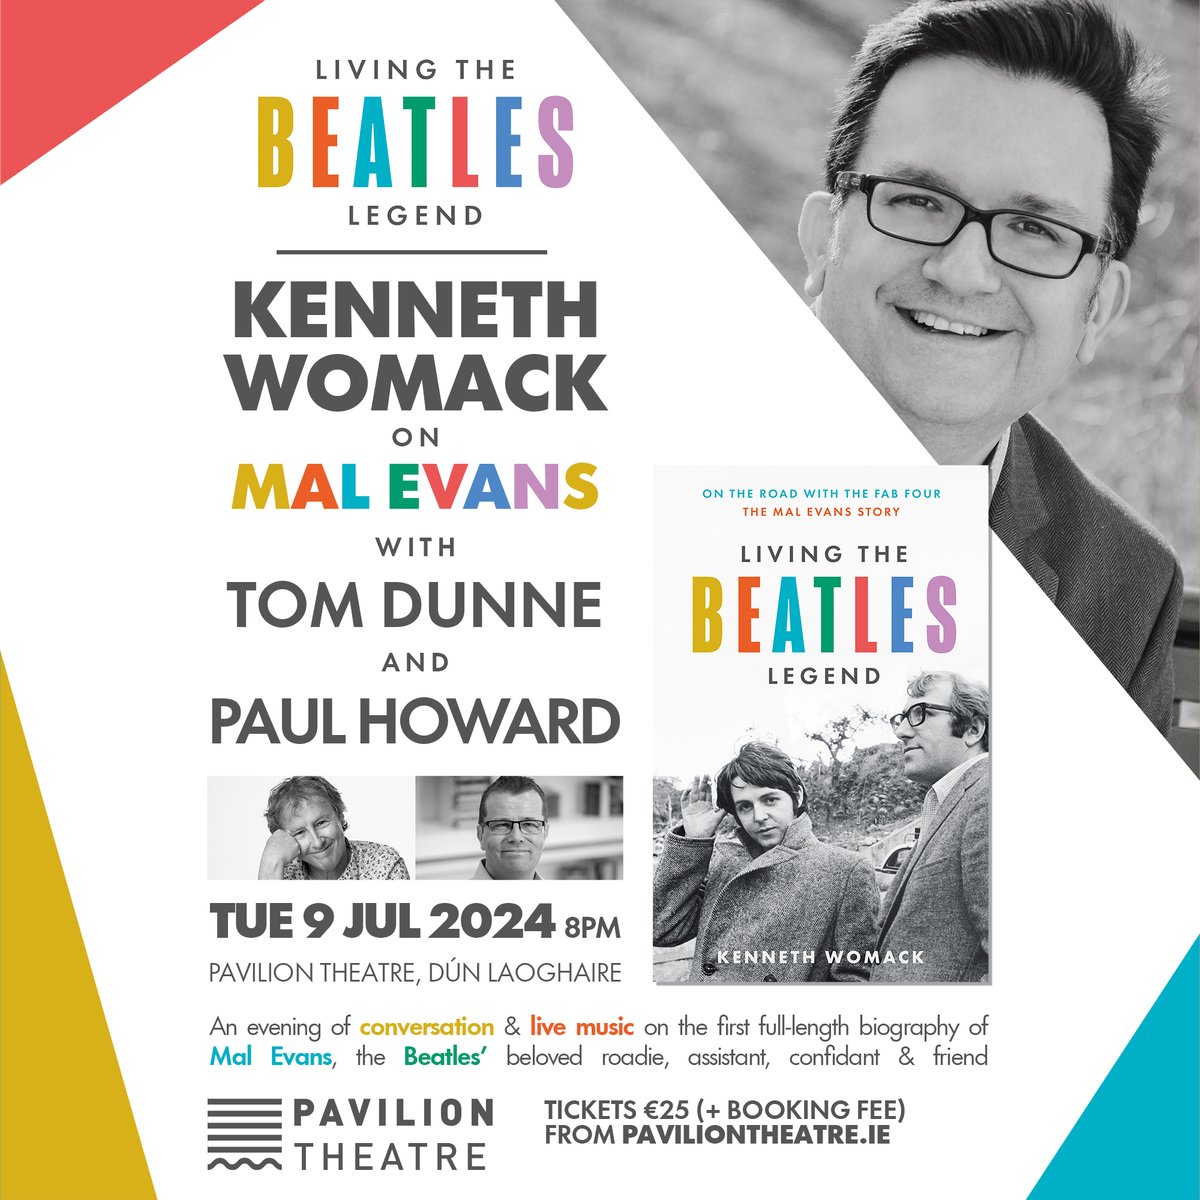 #FabFour Hey Beatles fans! Two great gigs up coming in The Pavilion DL: May 14th with the great Mark Lewisohn and this one with Kenneth Womack and some local lads on July 9th. Come Together, Beatles fans! Tix at pavilion.ie